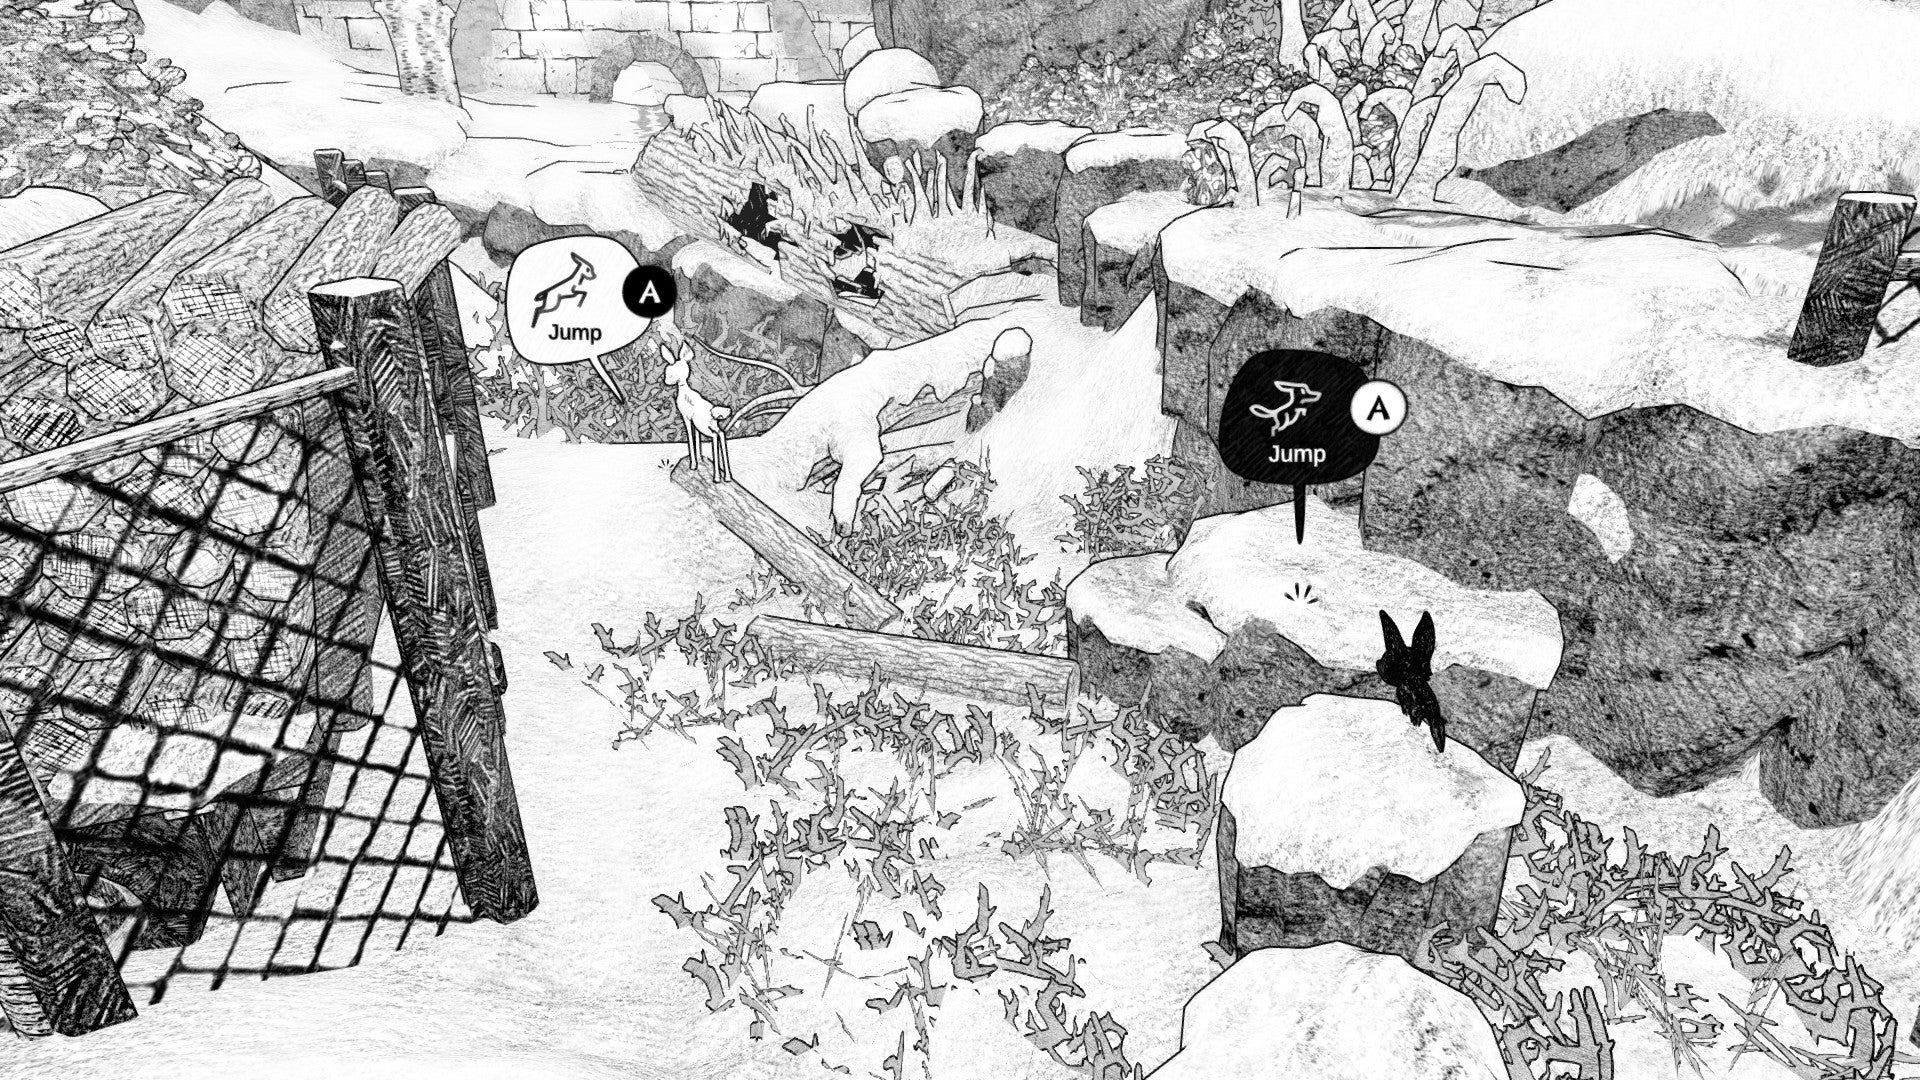 A Blanc screenshot showing the two animals make their way through a platforming section with brambles and rocks